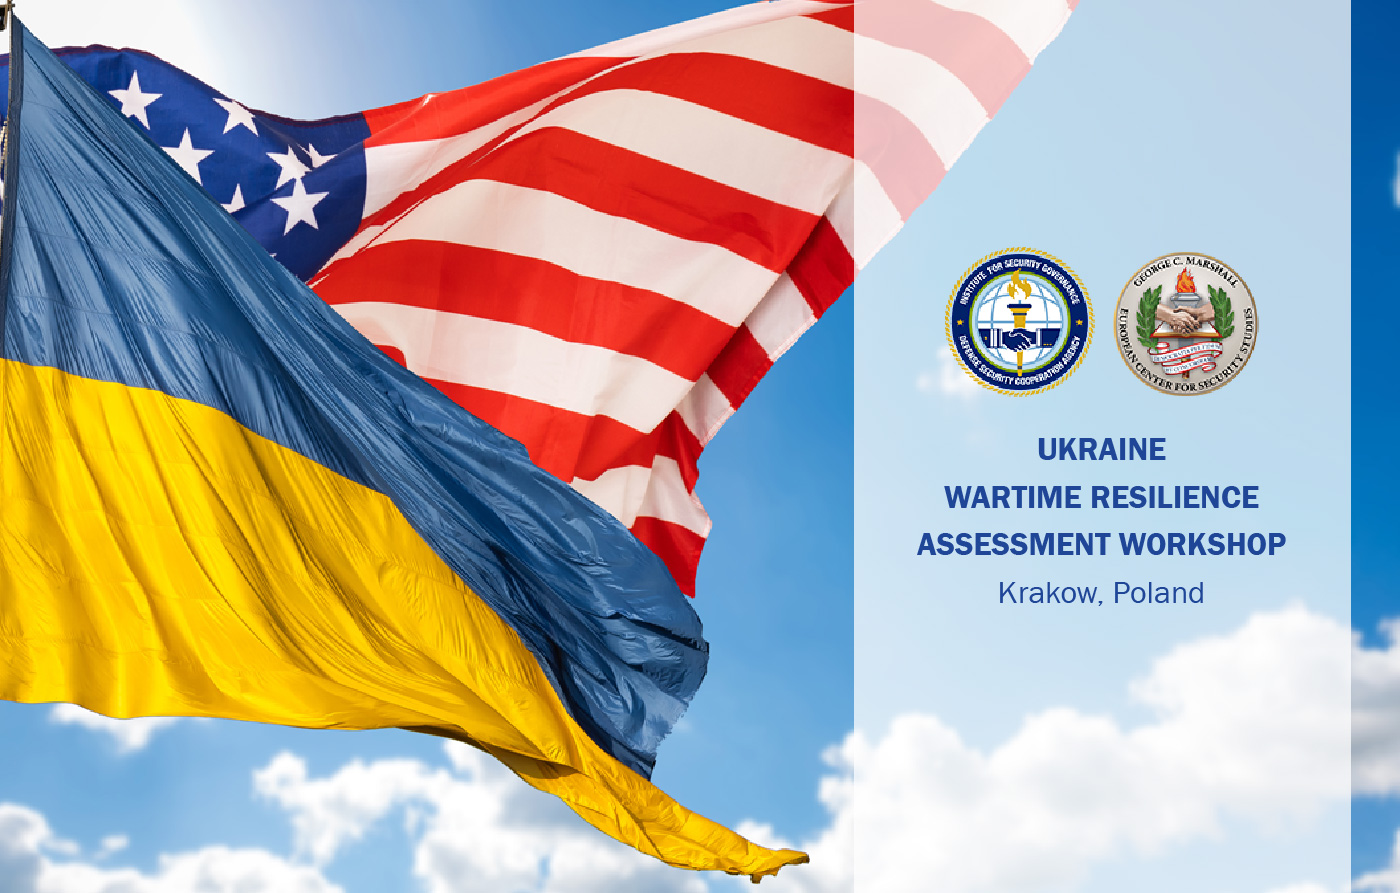 American Flag and Ukrainian Flag on a blue sky with the Institute for Security Governance seal next to the George C. Marshall seal with the text Ukraine Wartime Resilience Assessment Workshop